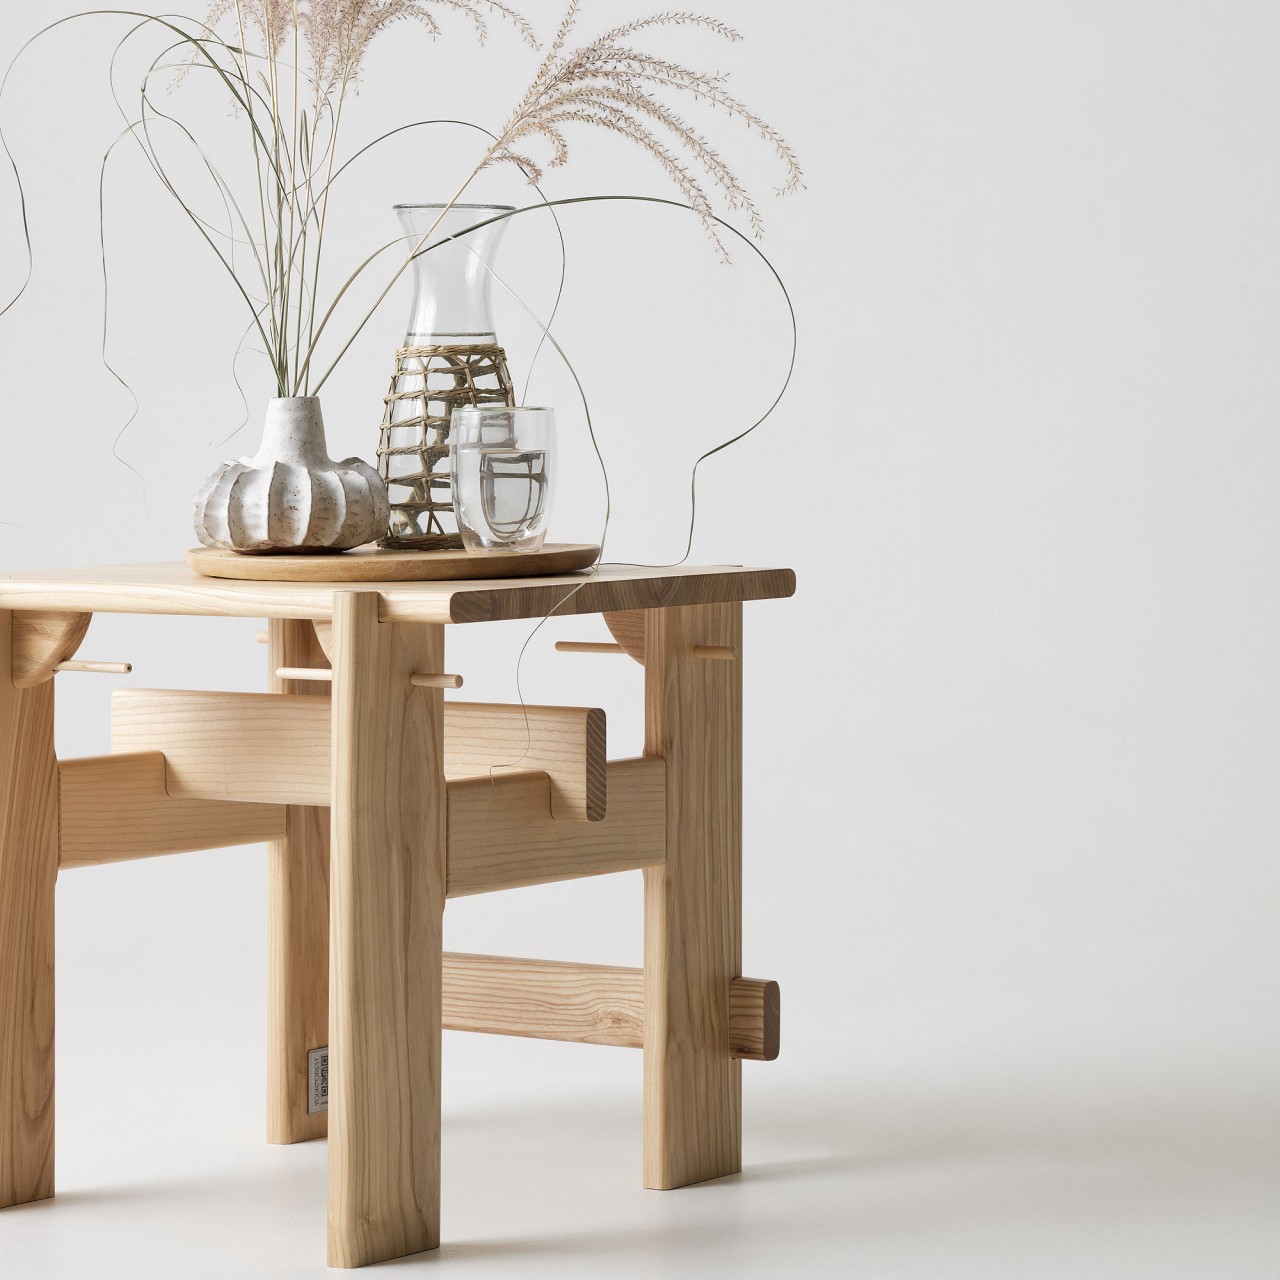 Ukrainian-designed furniture collection returns to the basics of simplicity and ease